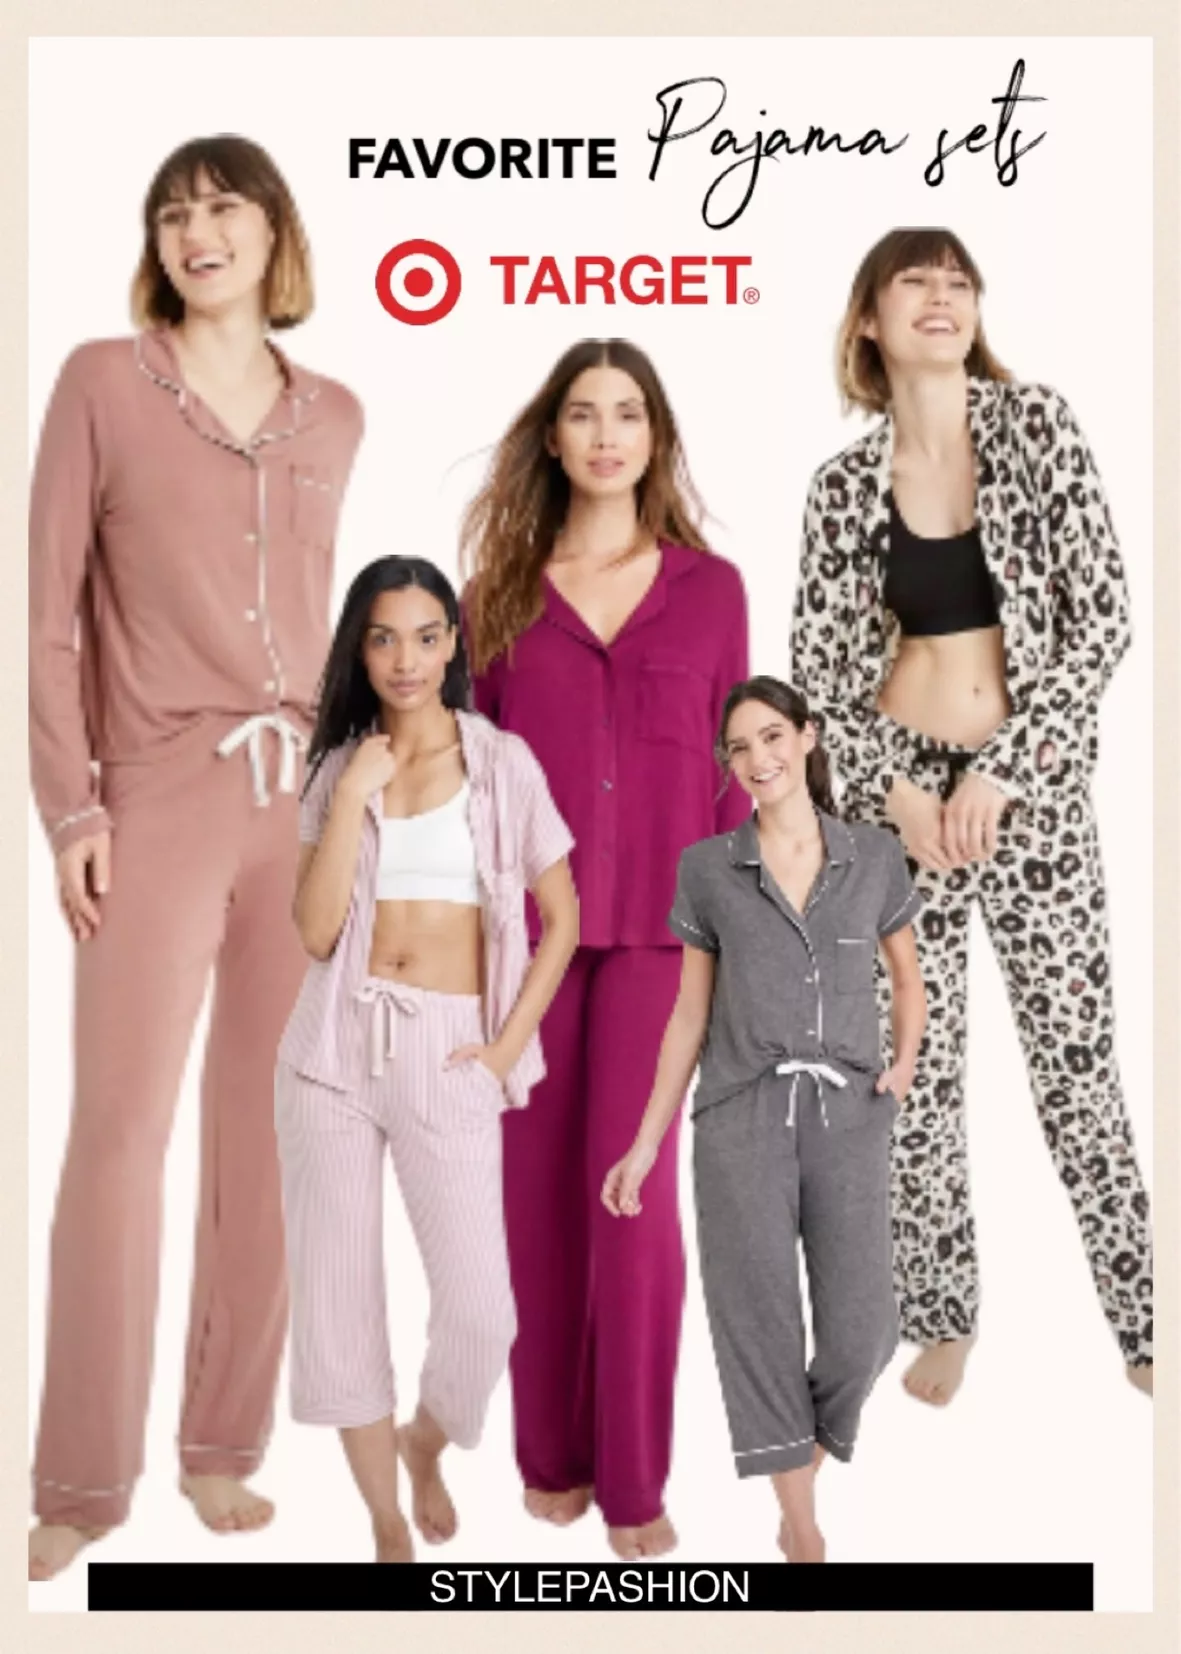 Floral Print Beautifully Soft Notch Collar Pajama Set, Target Has the Best  Gifts to Get Your BFF This Holiday Season, So Start Stocking Up Now